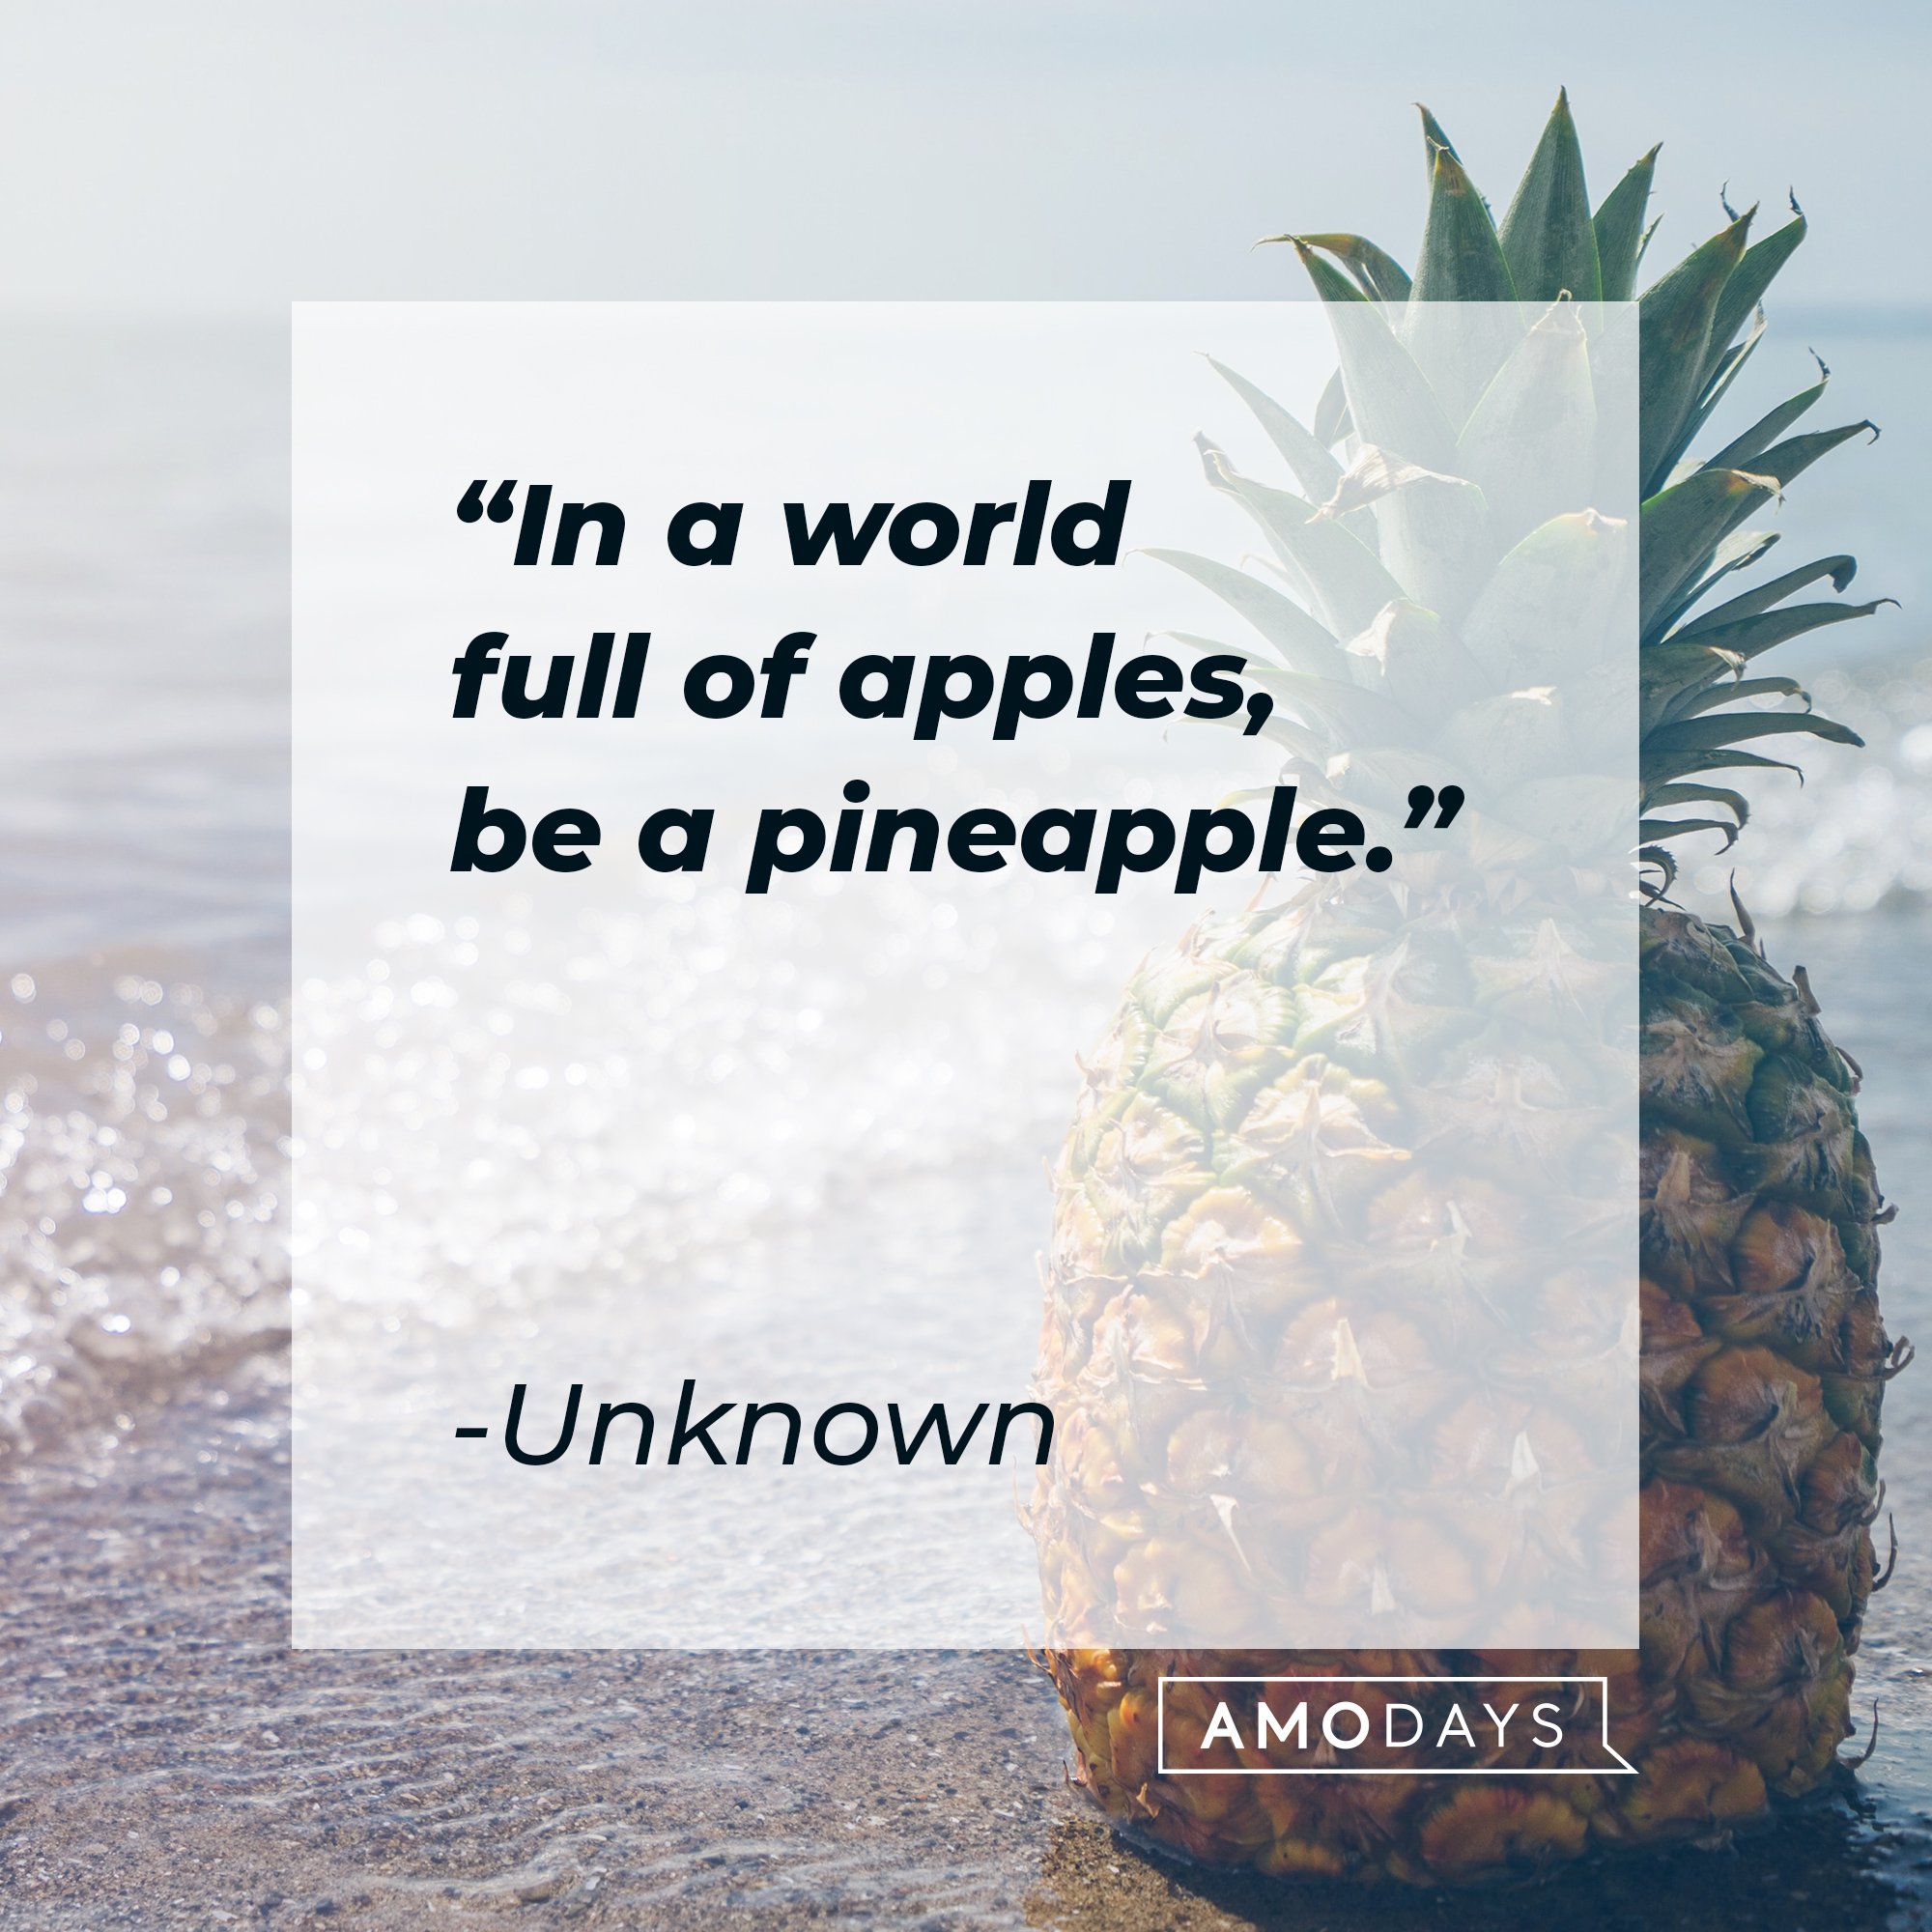 A quote from an unknown source: "In a world full of apples, be a pineapple." | Image: AmoDays